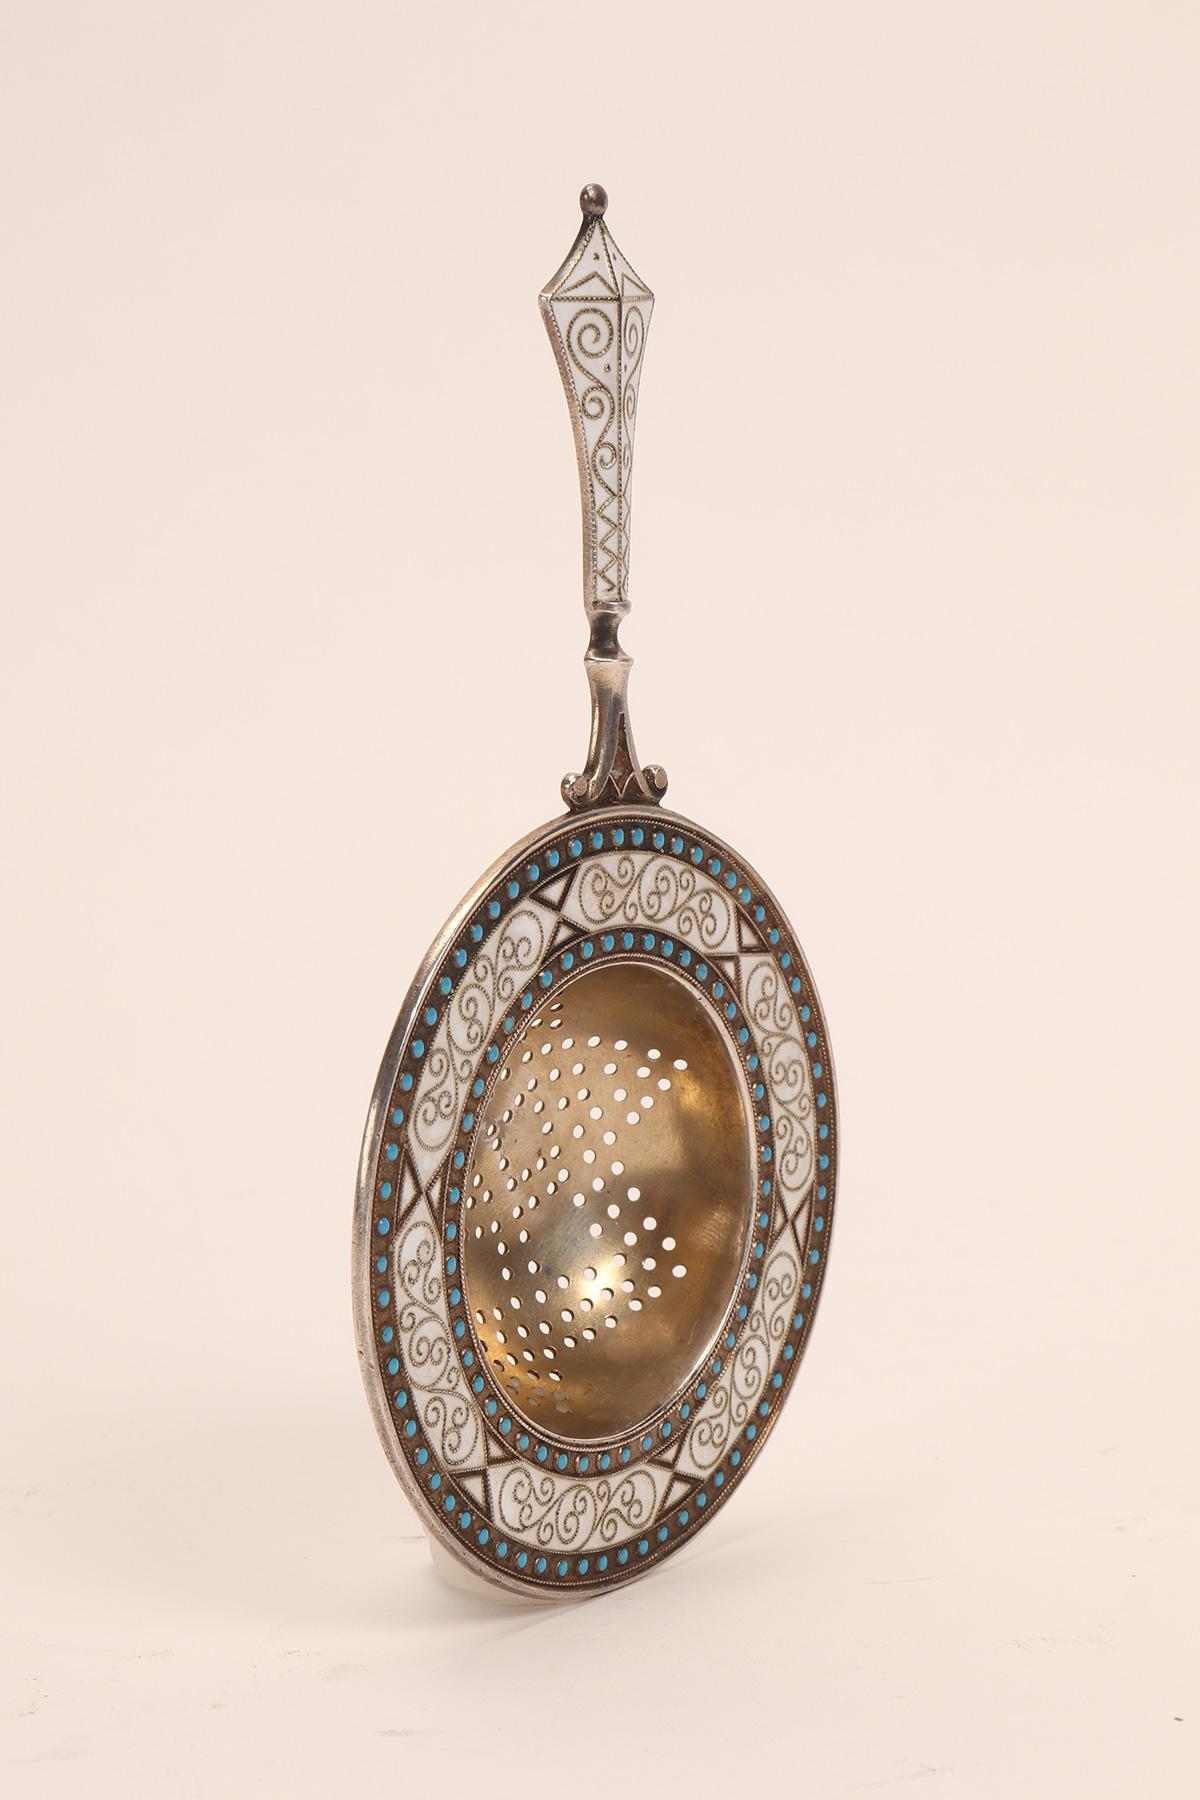 20th Century David Andreson Silver and Enamels Tea Strainer, Denmark, 1900